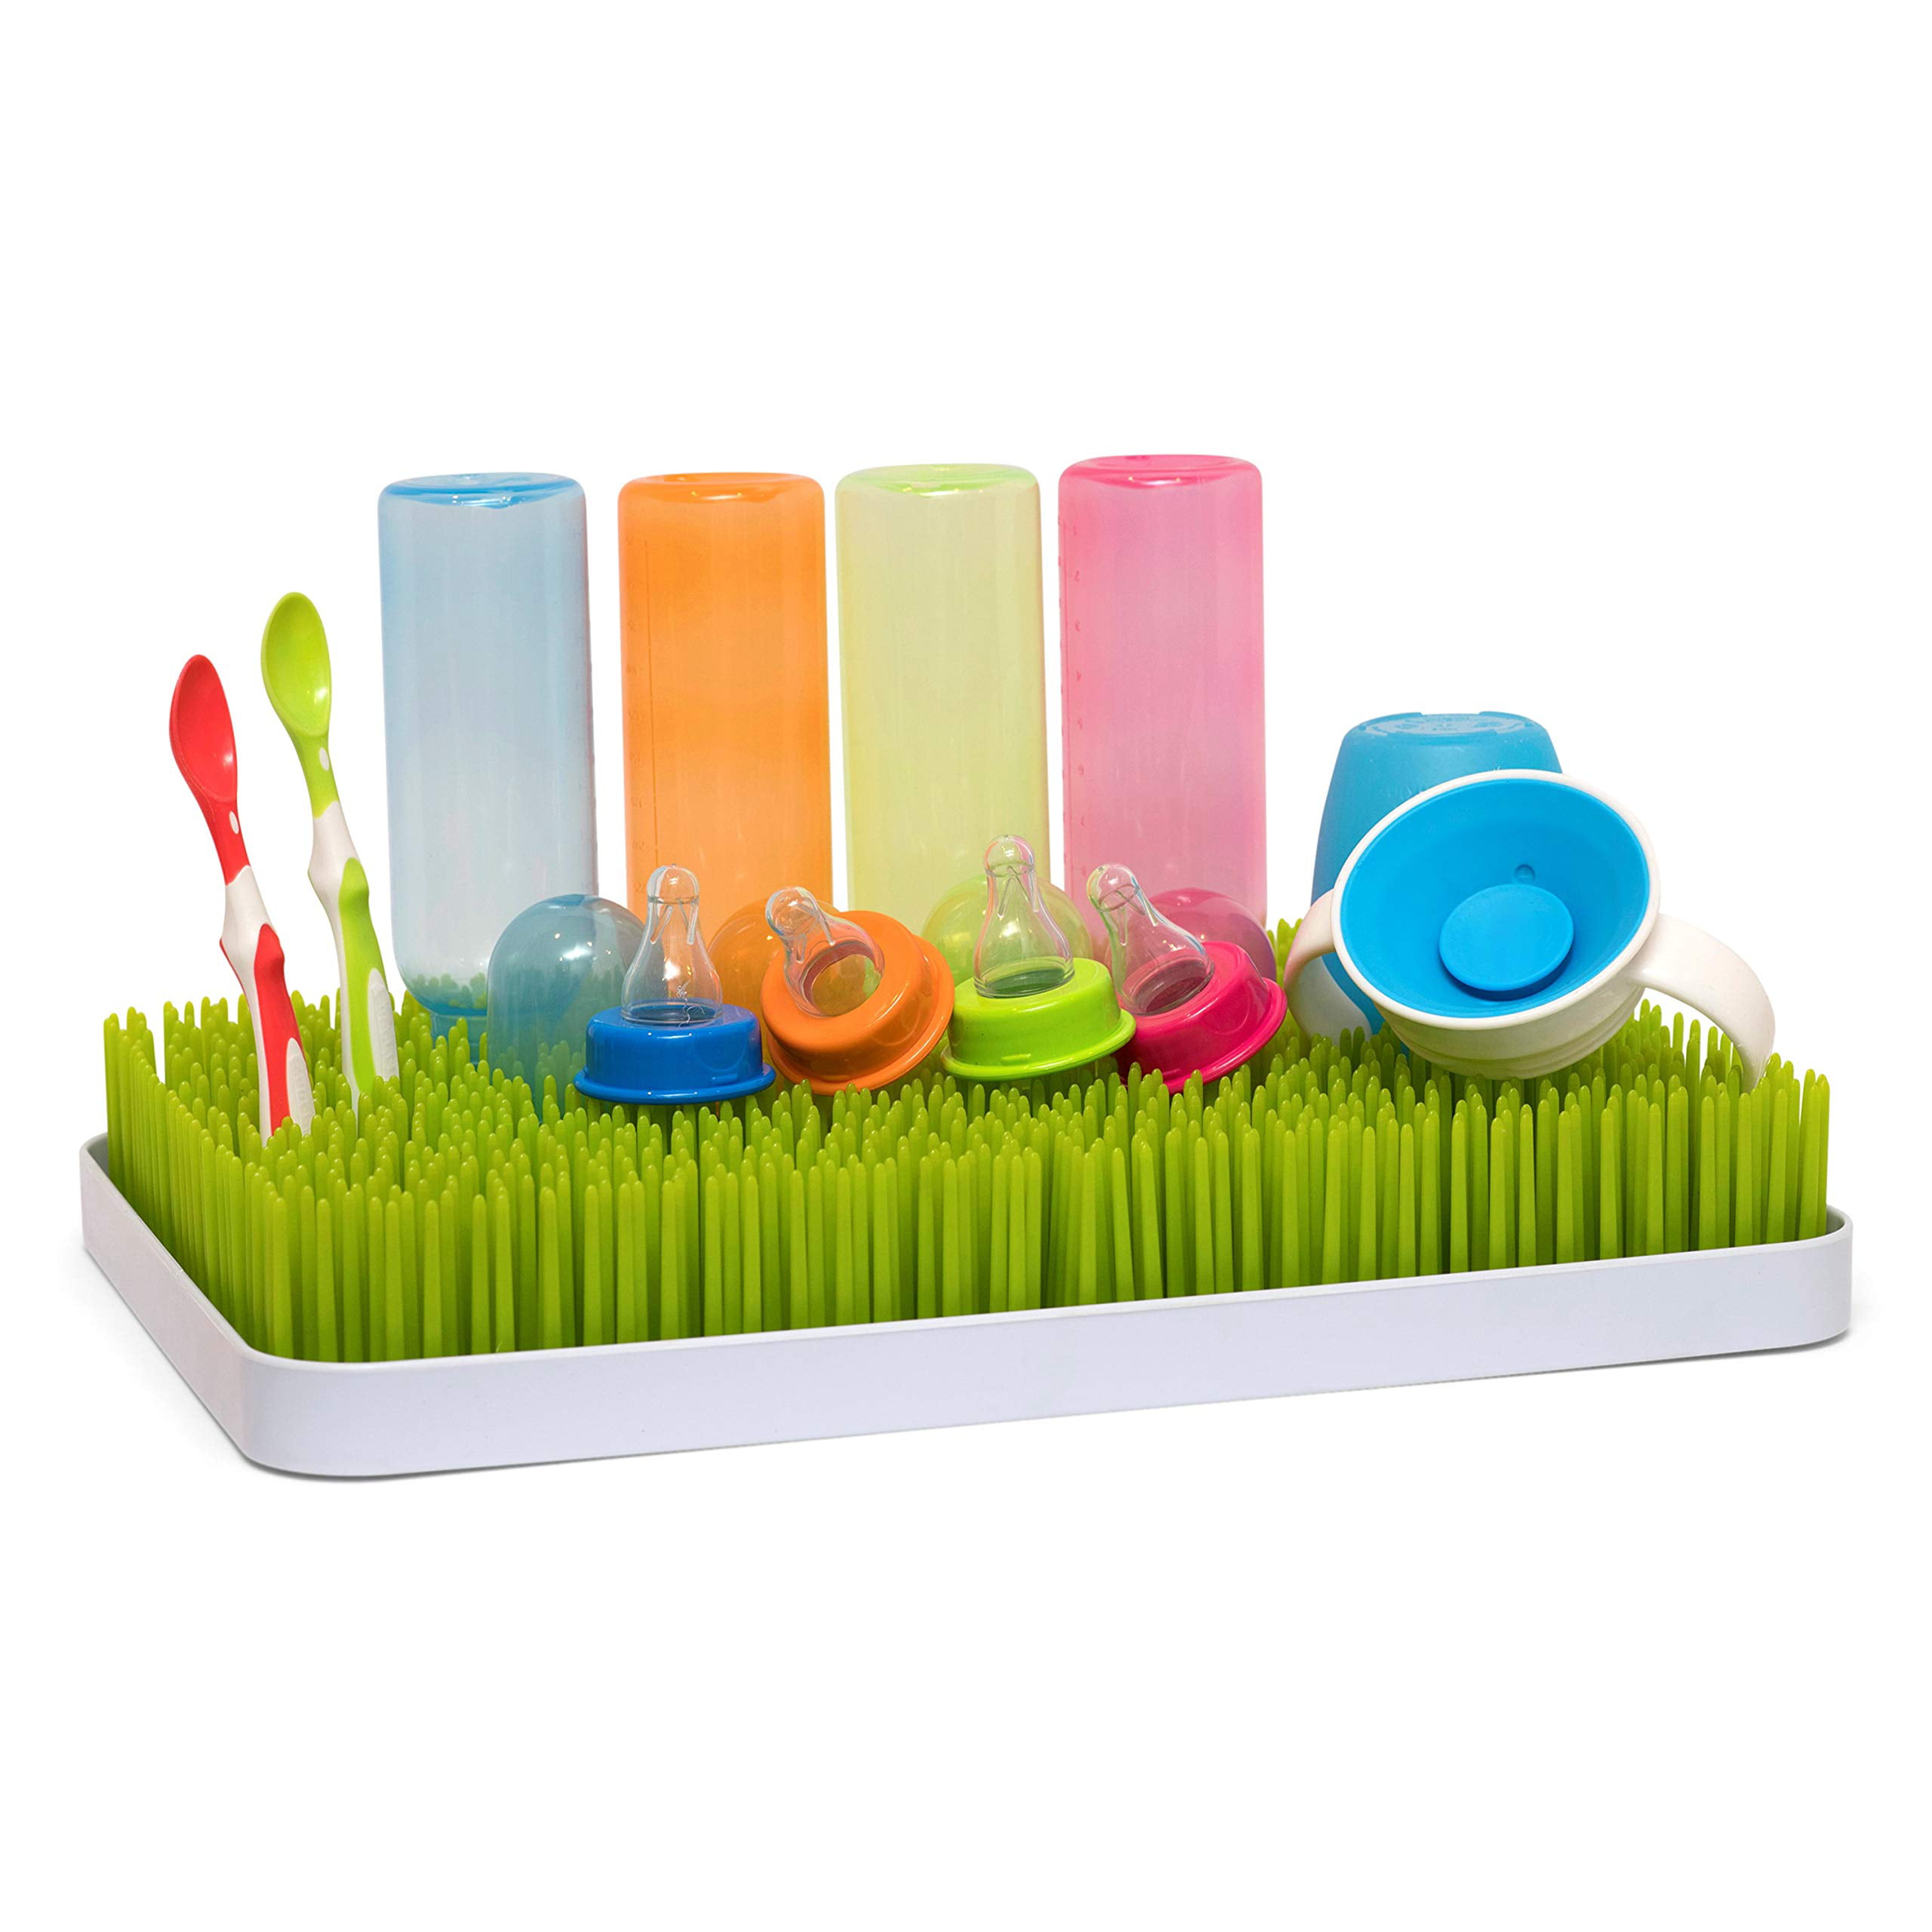 Baby Bottle Drying Rack - Silicone Mat - Accessory Cup - 7-Prong